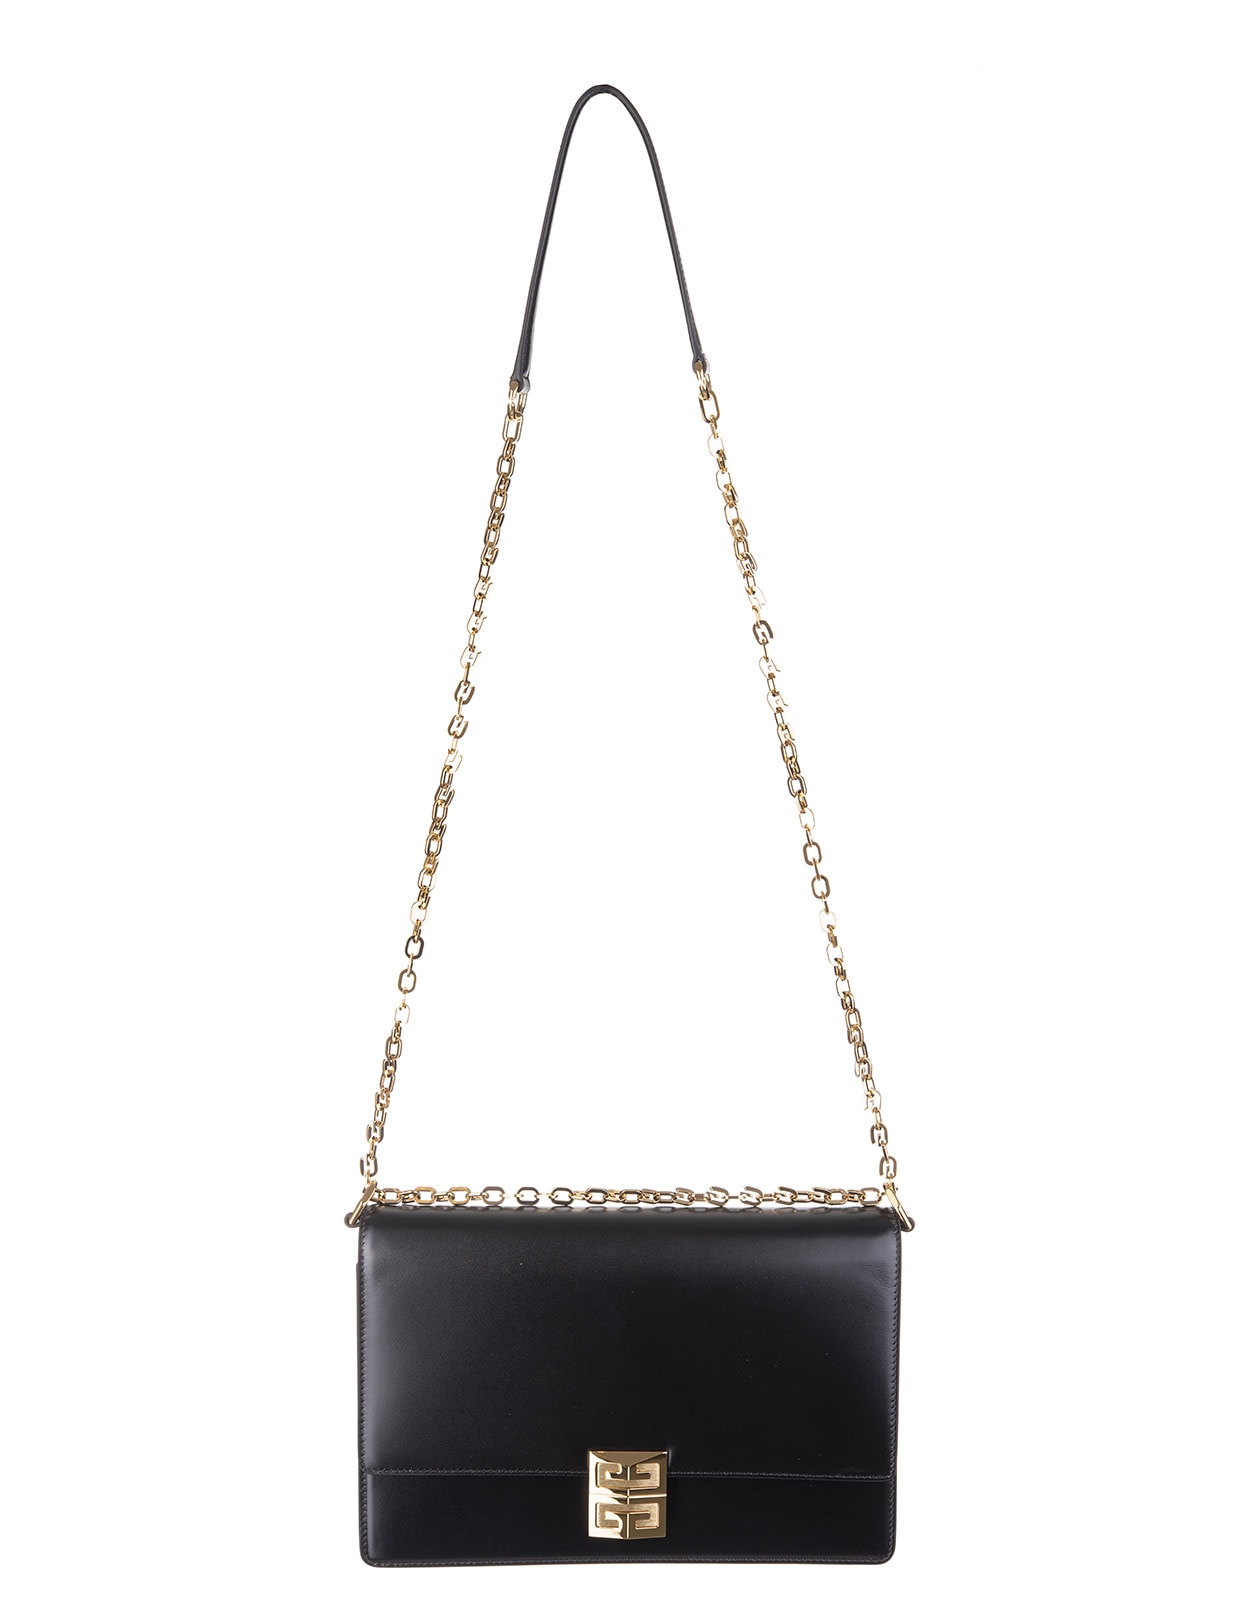 Givenchy Medium 4g Bag In Black Box Leather With Golden Chain